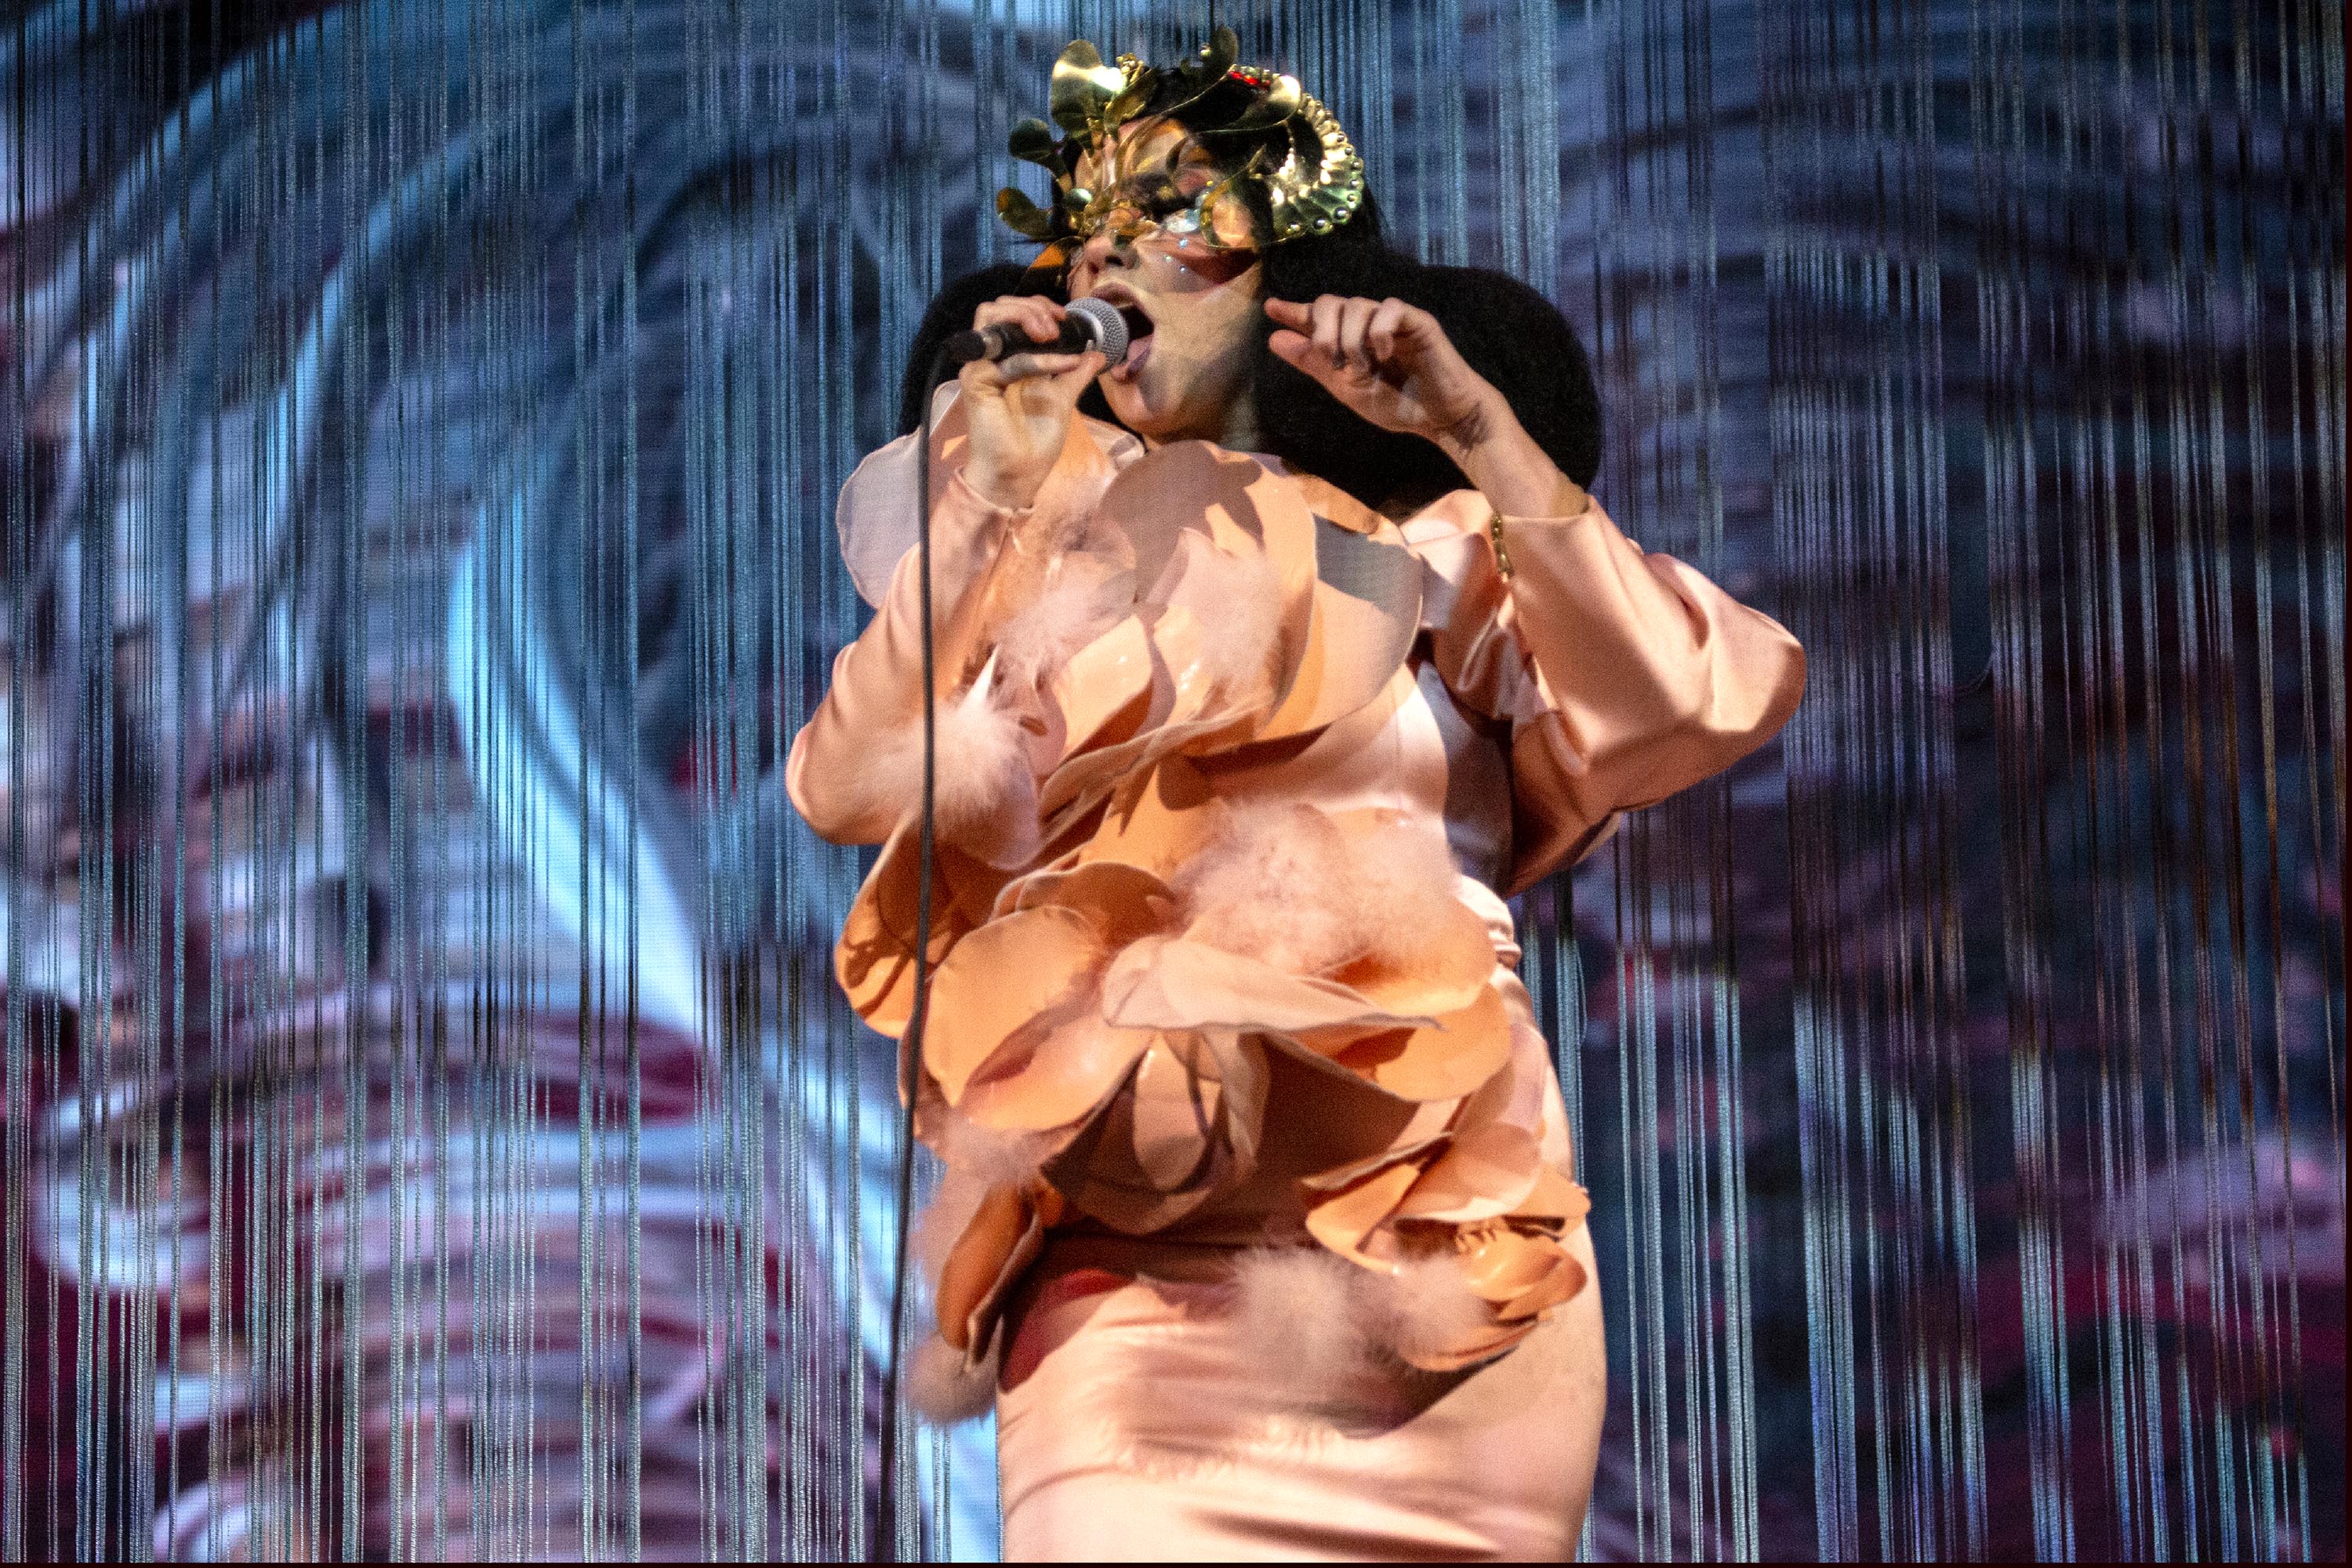 Björk performs onstage during her "Cornucopia" tour at The O2 Arena on November 19, 2019 in London, England.